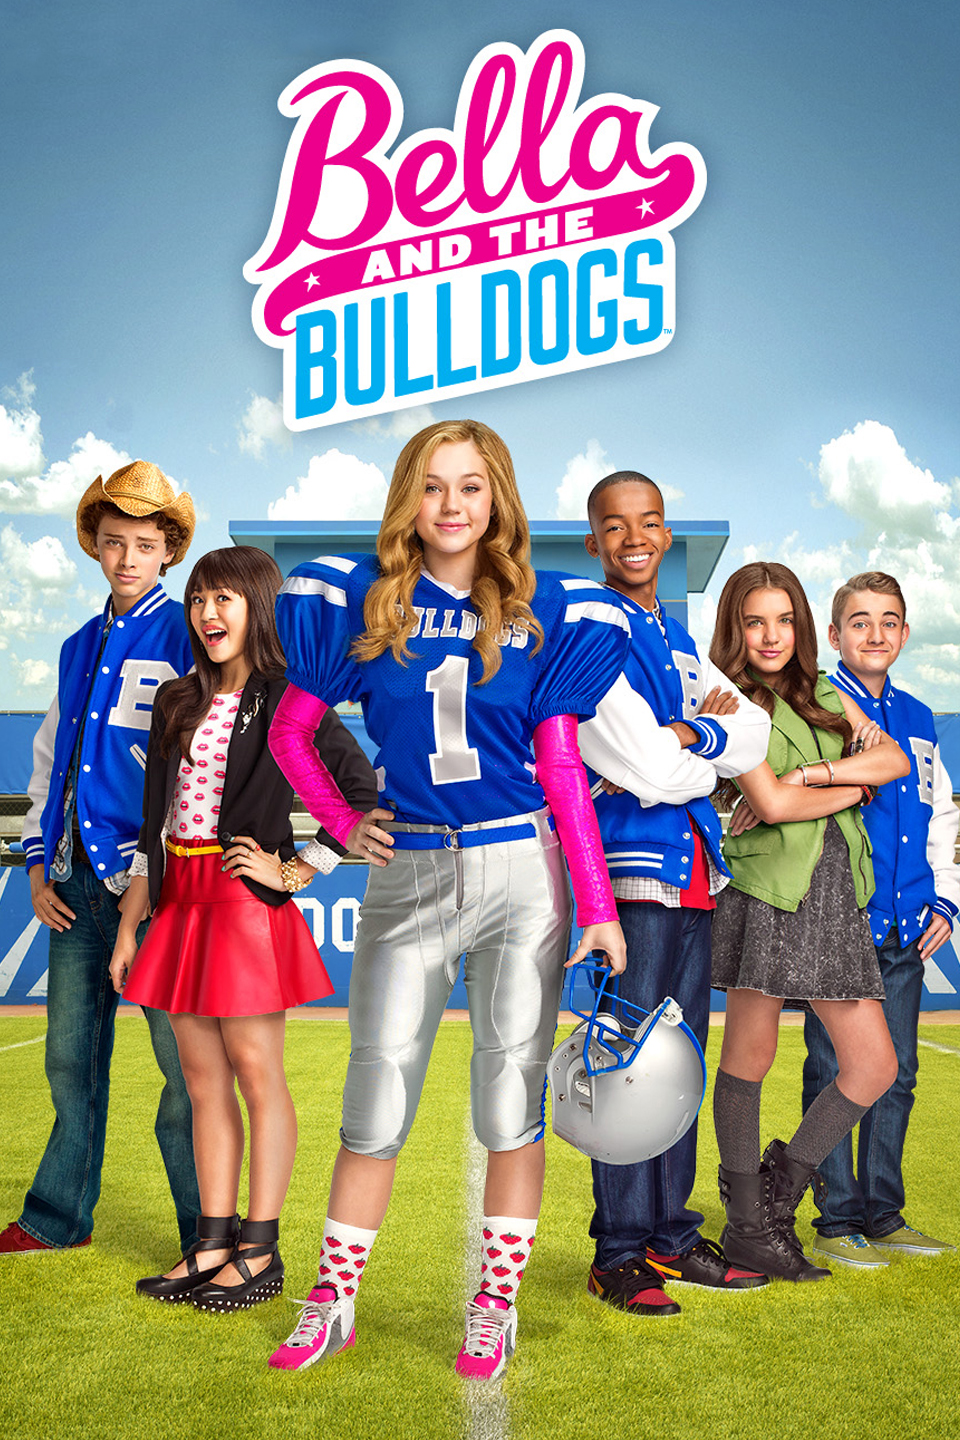 https://static.wikia.nocookie.net/international-entertainment-project/images/5/50/Bella_and_the_Bulldogs_poster.jpg/revision/latest?cb=20230617144901